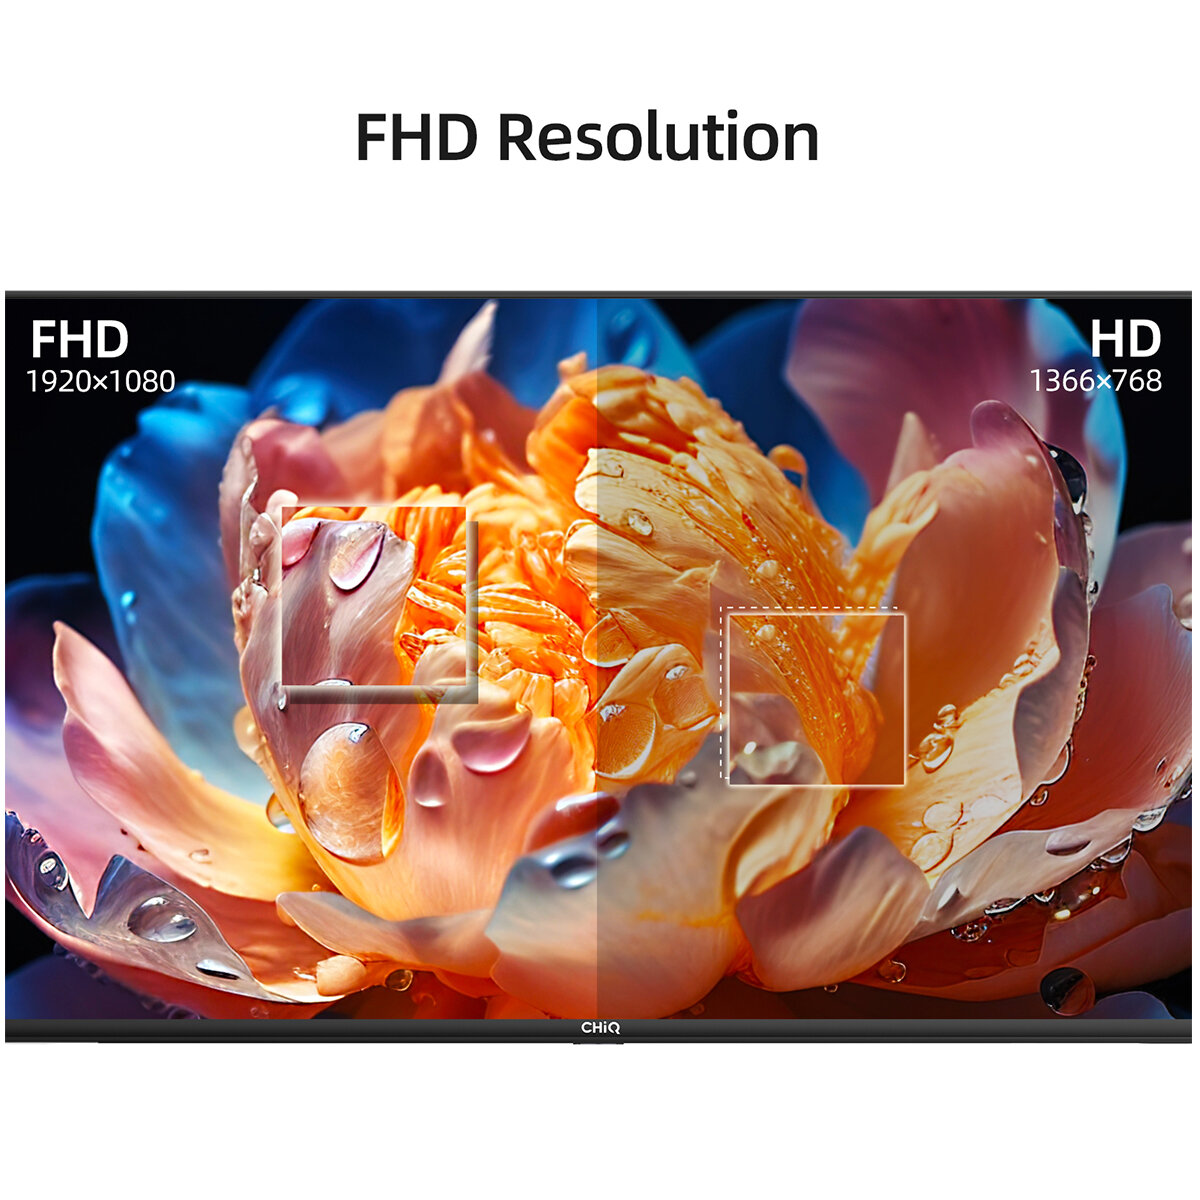 CHiQ 40-inch LED FHD Android TV L40G7P – Prouds Fiji